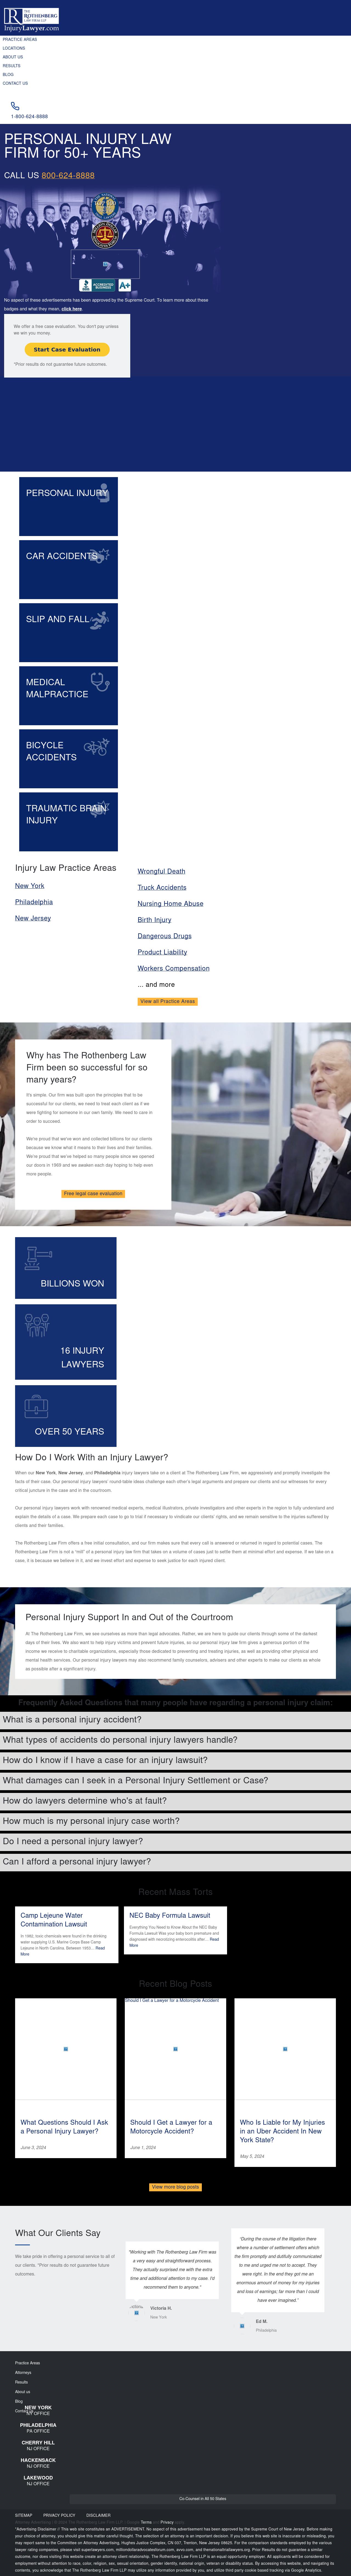 The Rothenberg Law Firm LLP - Lakewood NJ Lawyers